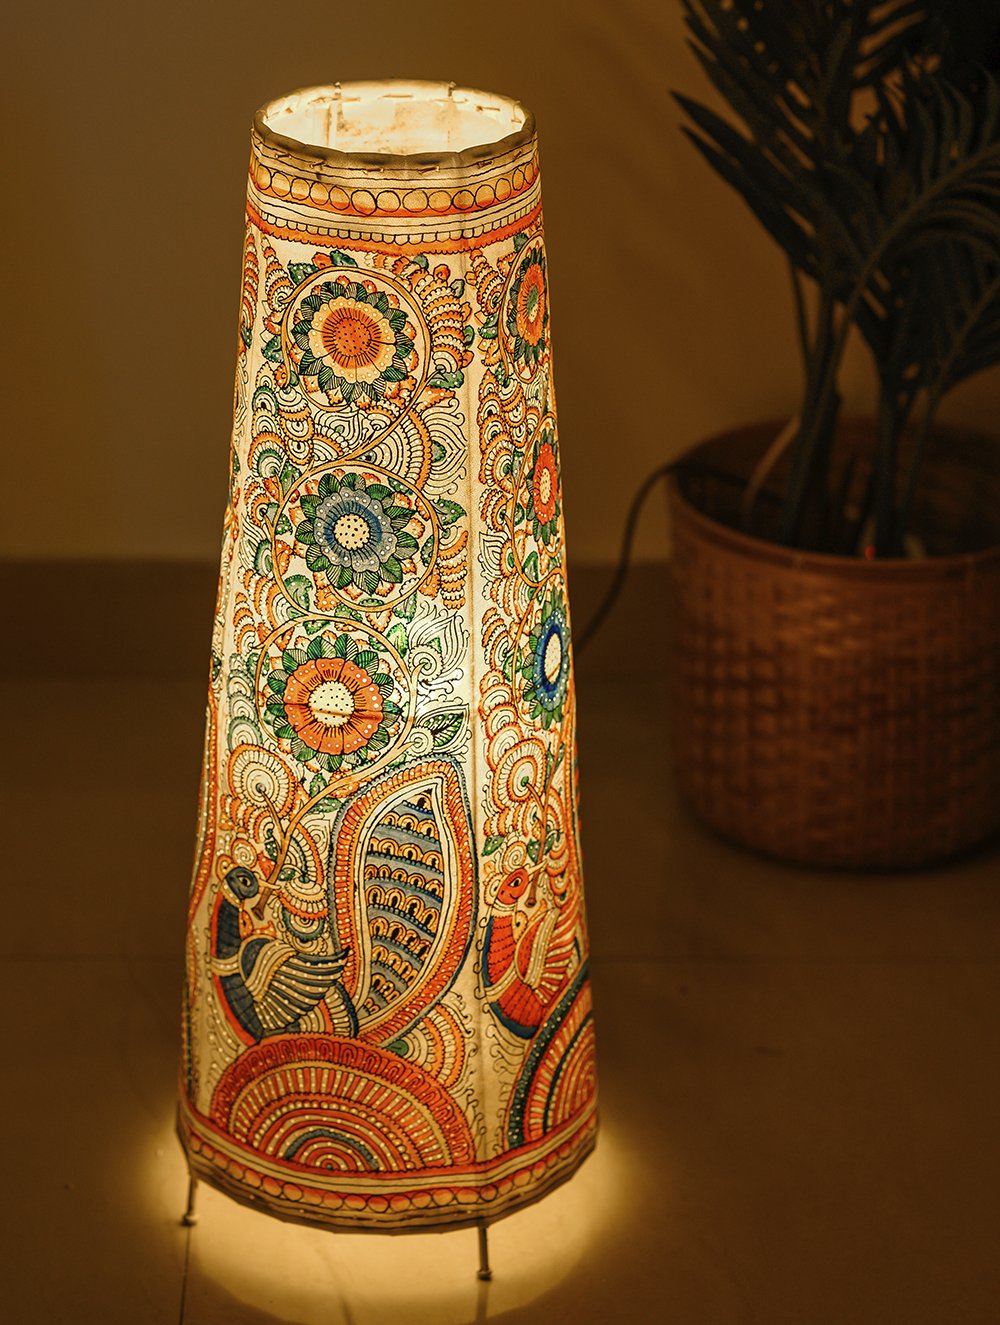 Load image into Gallery viewer, Andhra Leather Craft - Floor Lamp Shade (Large) - Peacocks and Flowers